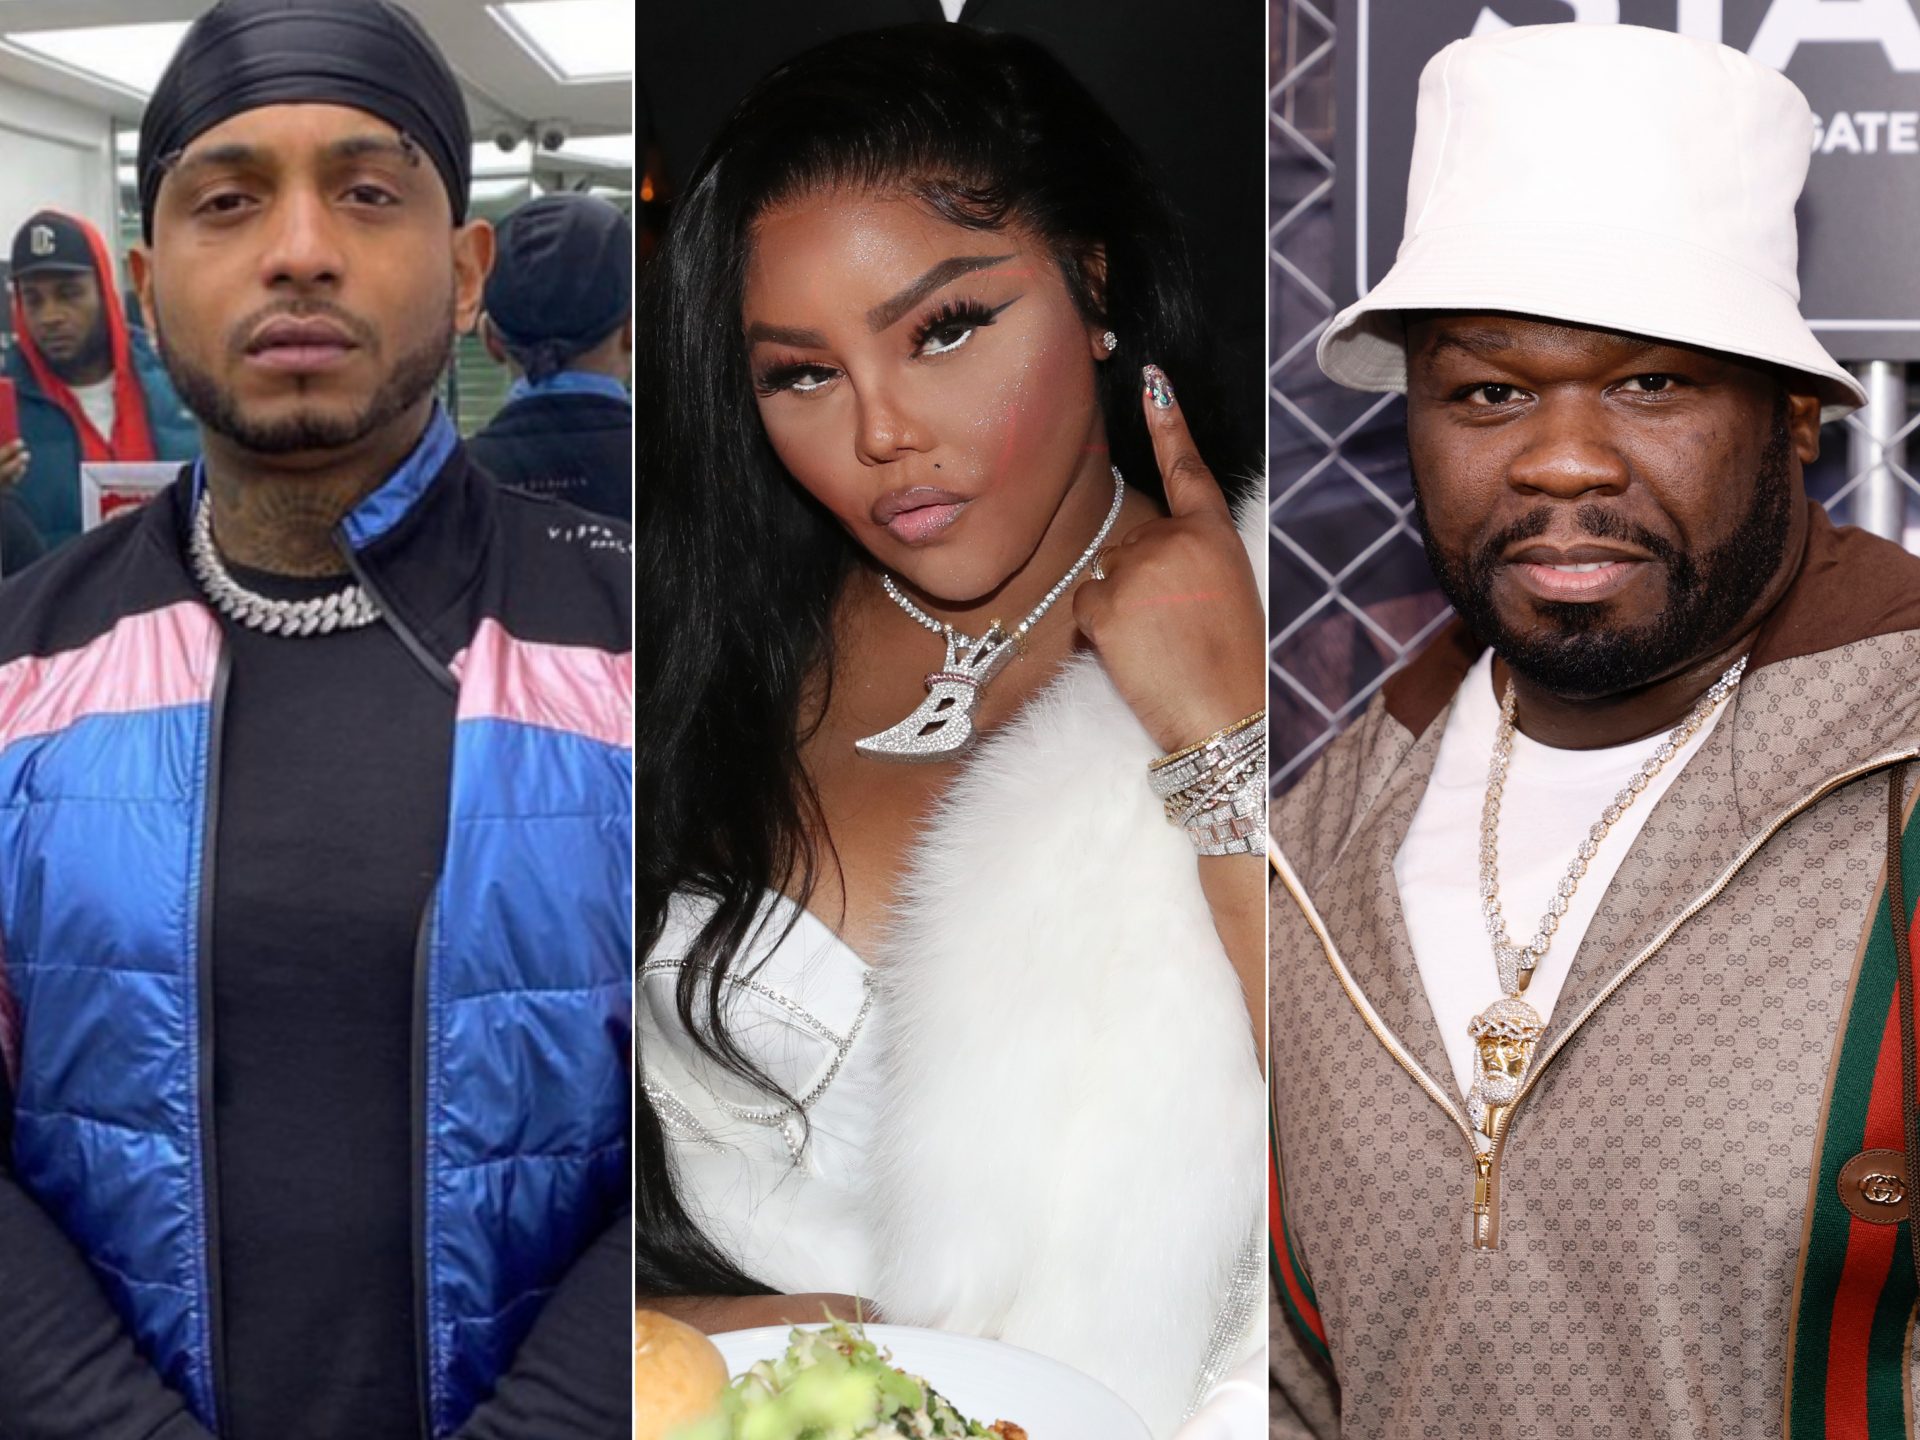 Mr. Papers Calls Out 50 Cent For Speaking On His Daughter's Eye & Says Lil Kim's Verse On The 'Plan B' Remix Was About Him